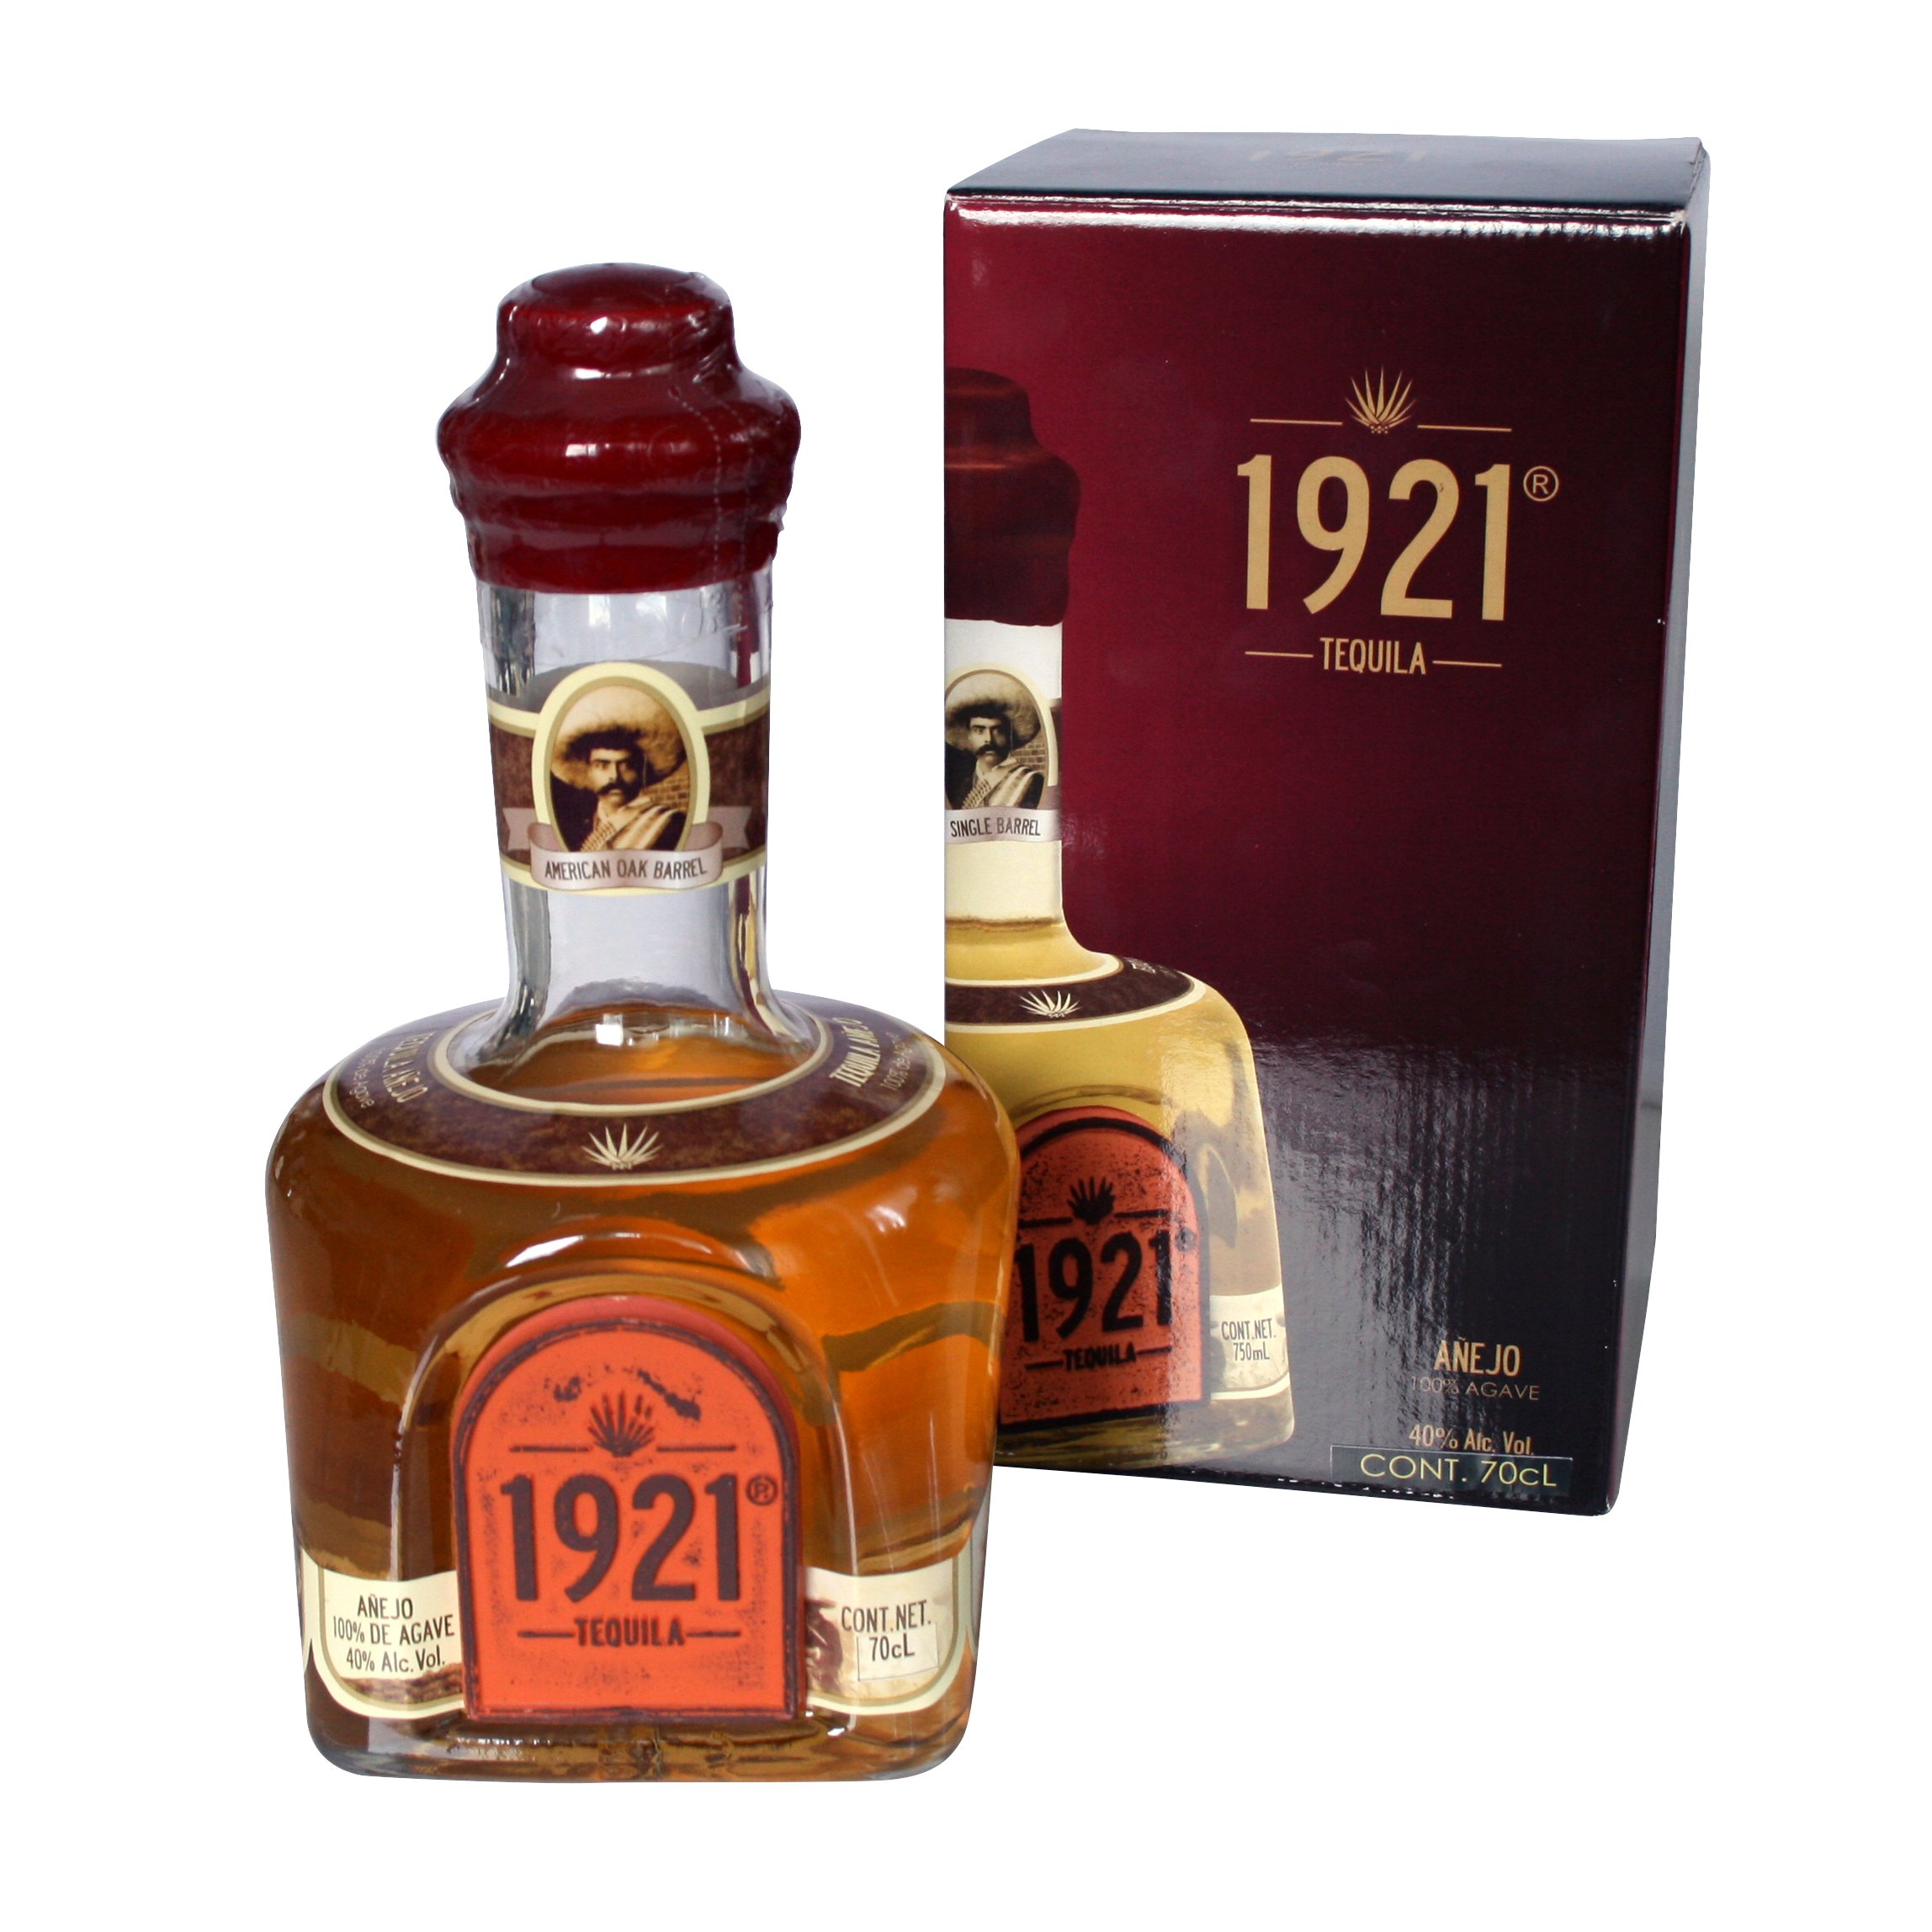 TEQUILA 1921 ANEJO 700ml 40%Vol 100%AGAVE bottle